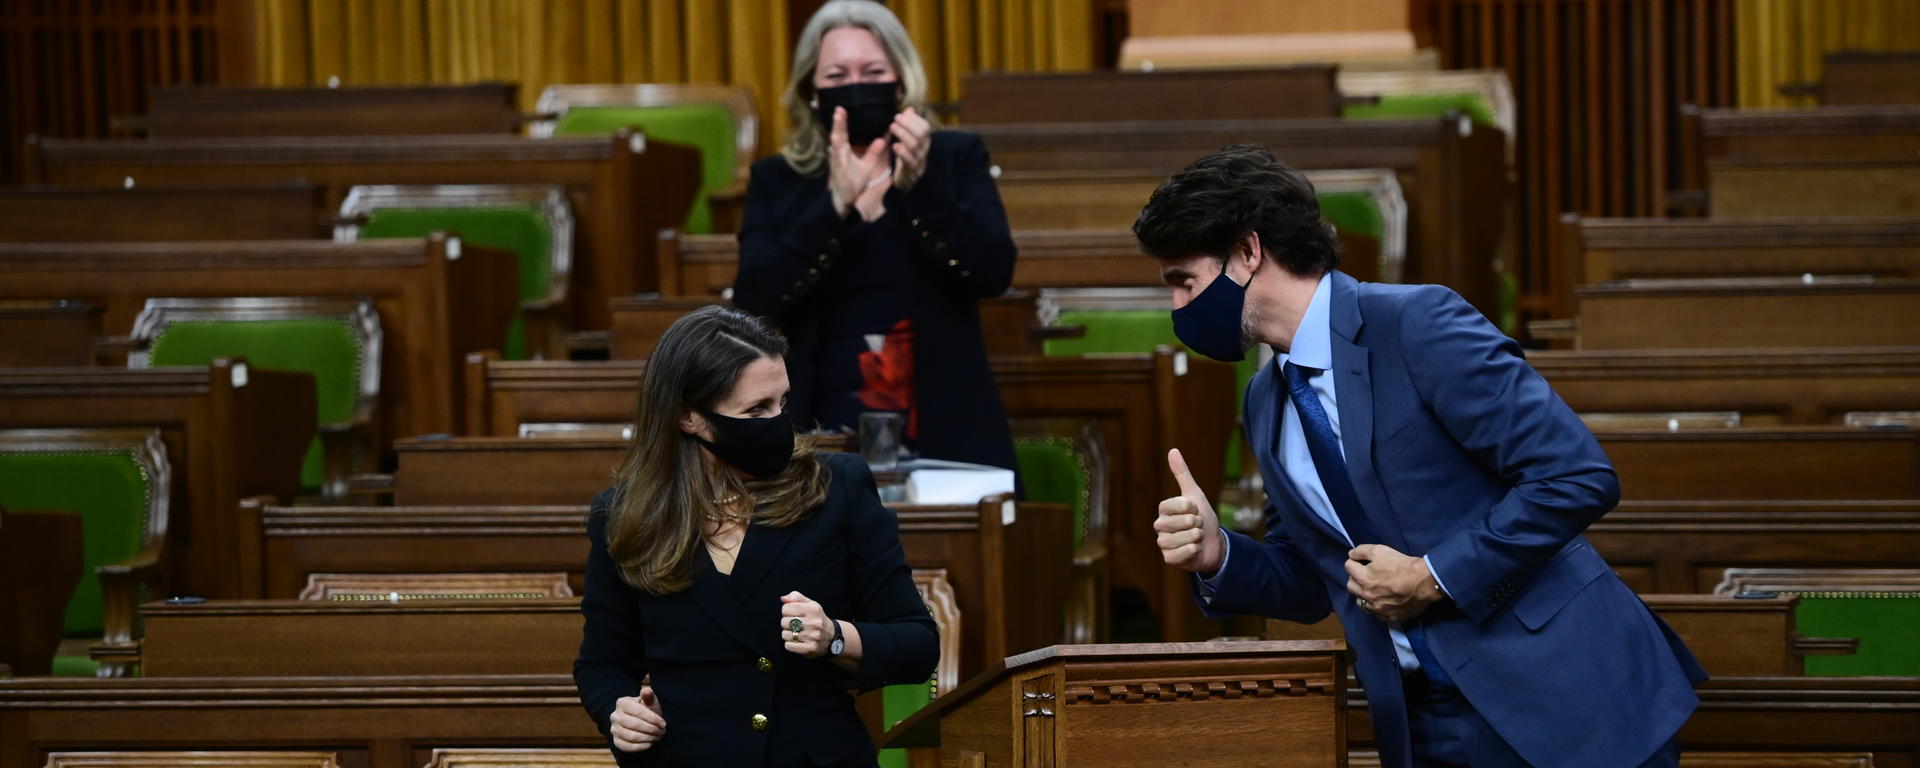 Prime Minister Justin Trudeau gives Finance Minister Chrystia Freeland the thumbs up